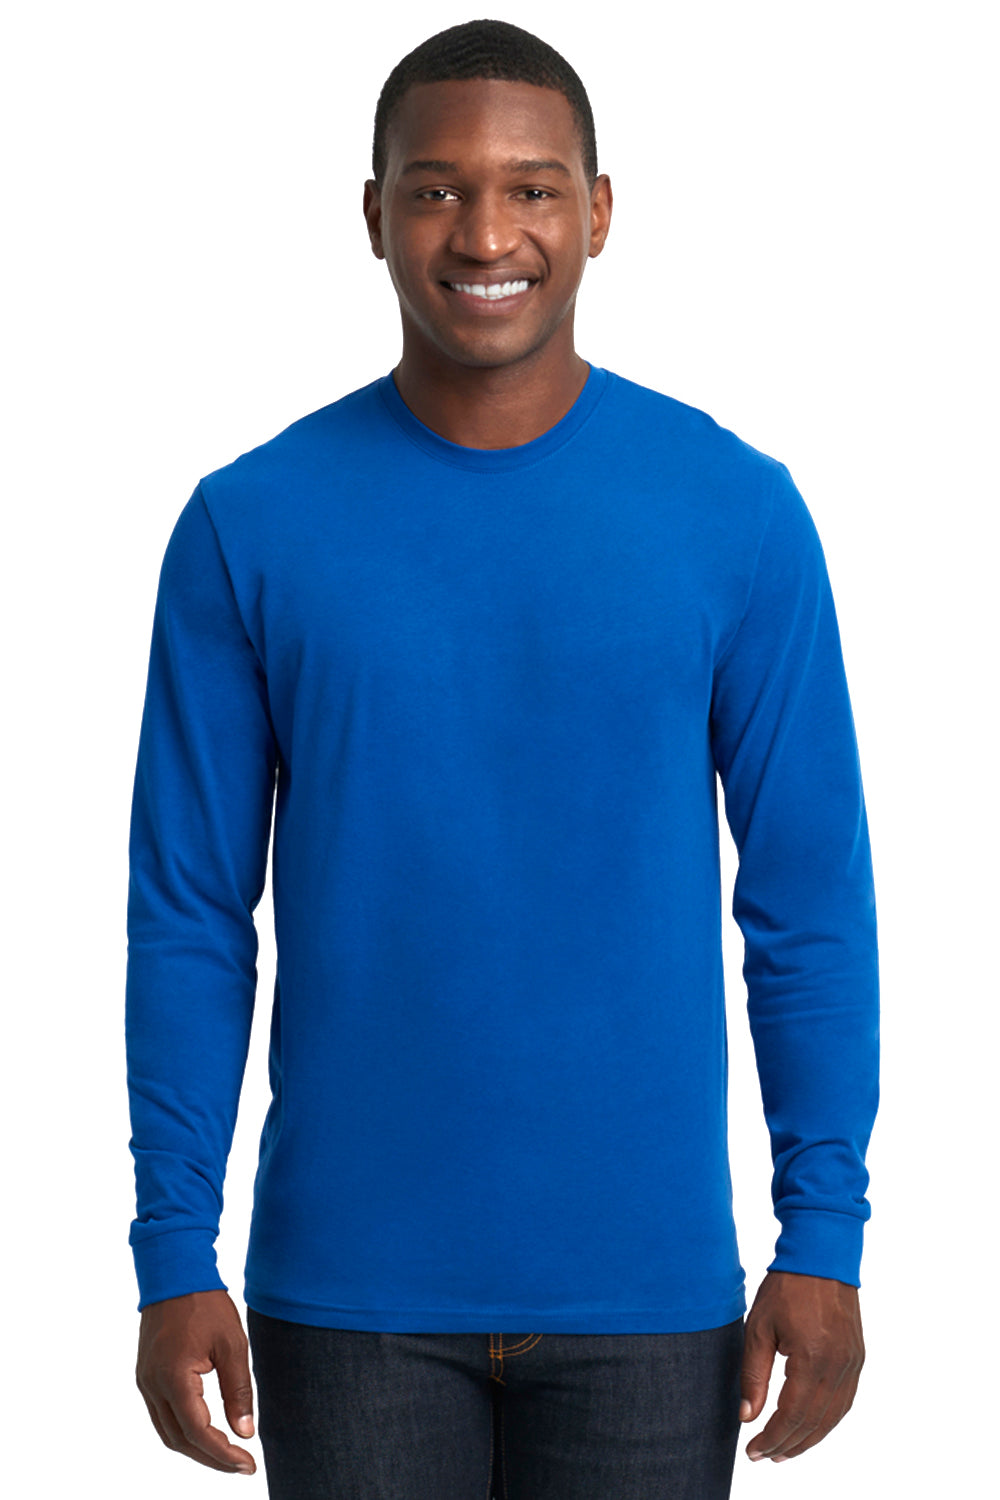 Next Level 6411 Sueded Jersey Long Sleeve Crewneck T-Shirt Royal Blue Front